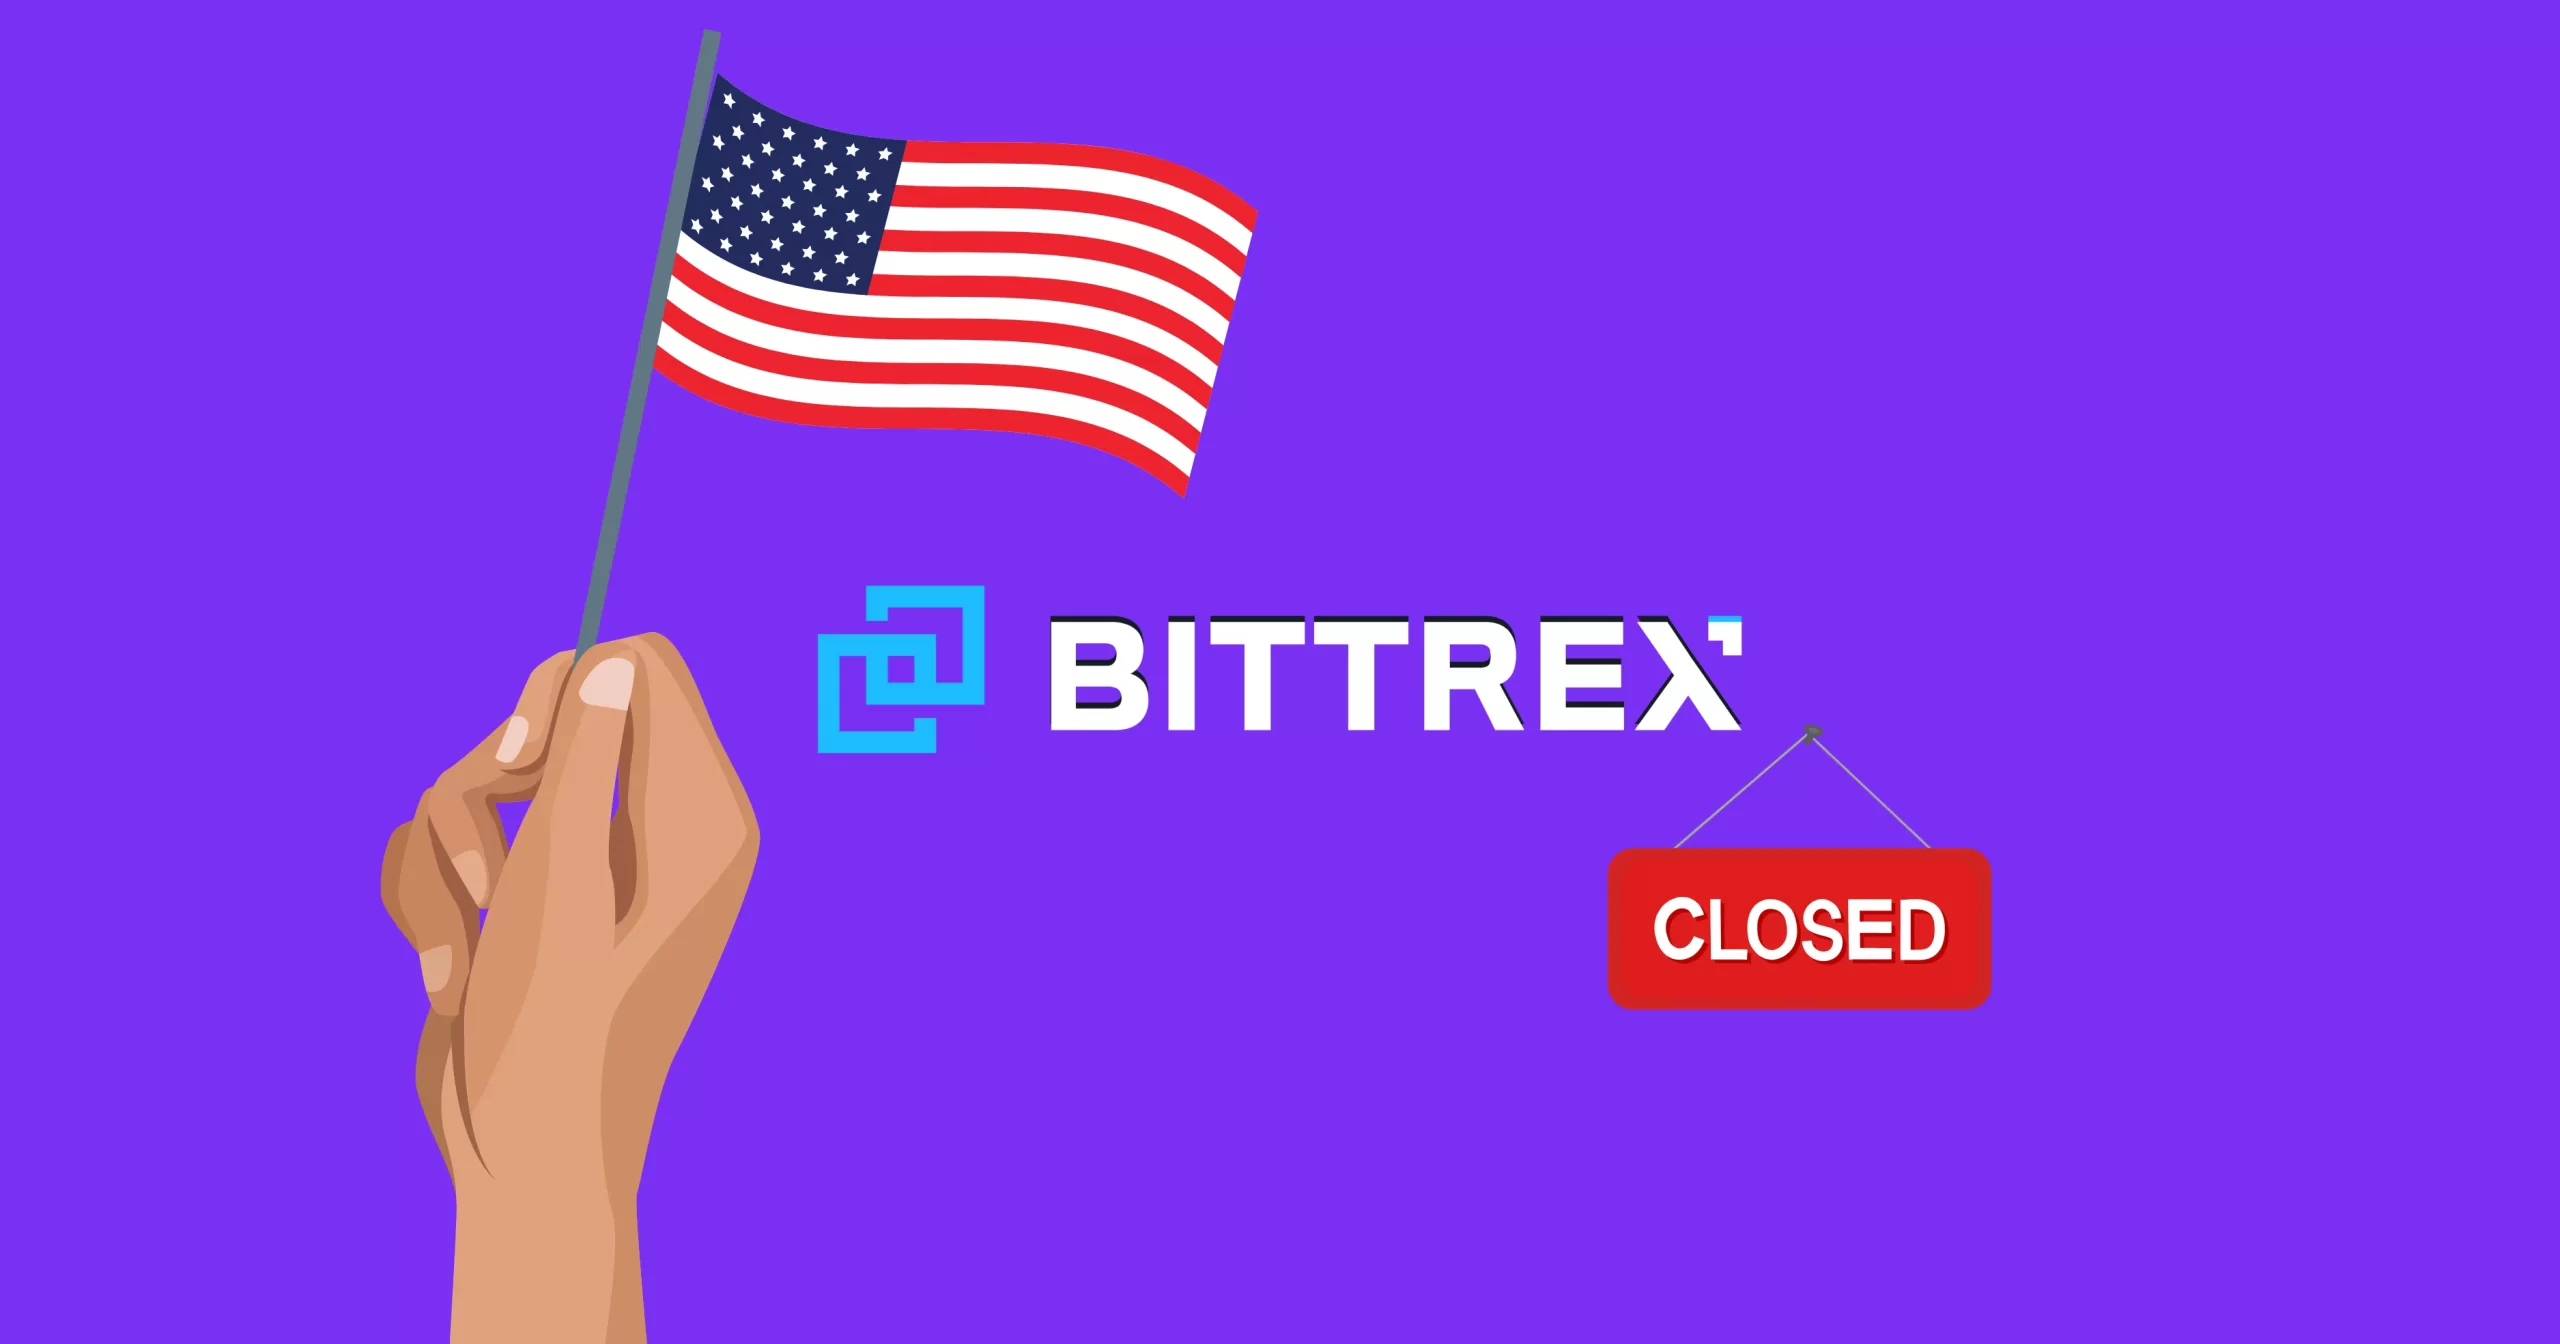 Crypto Exchange Bittrex Global Shuts Down Operations